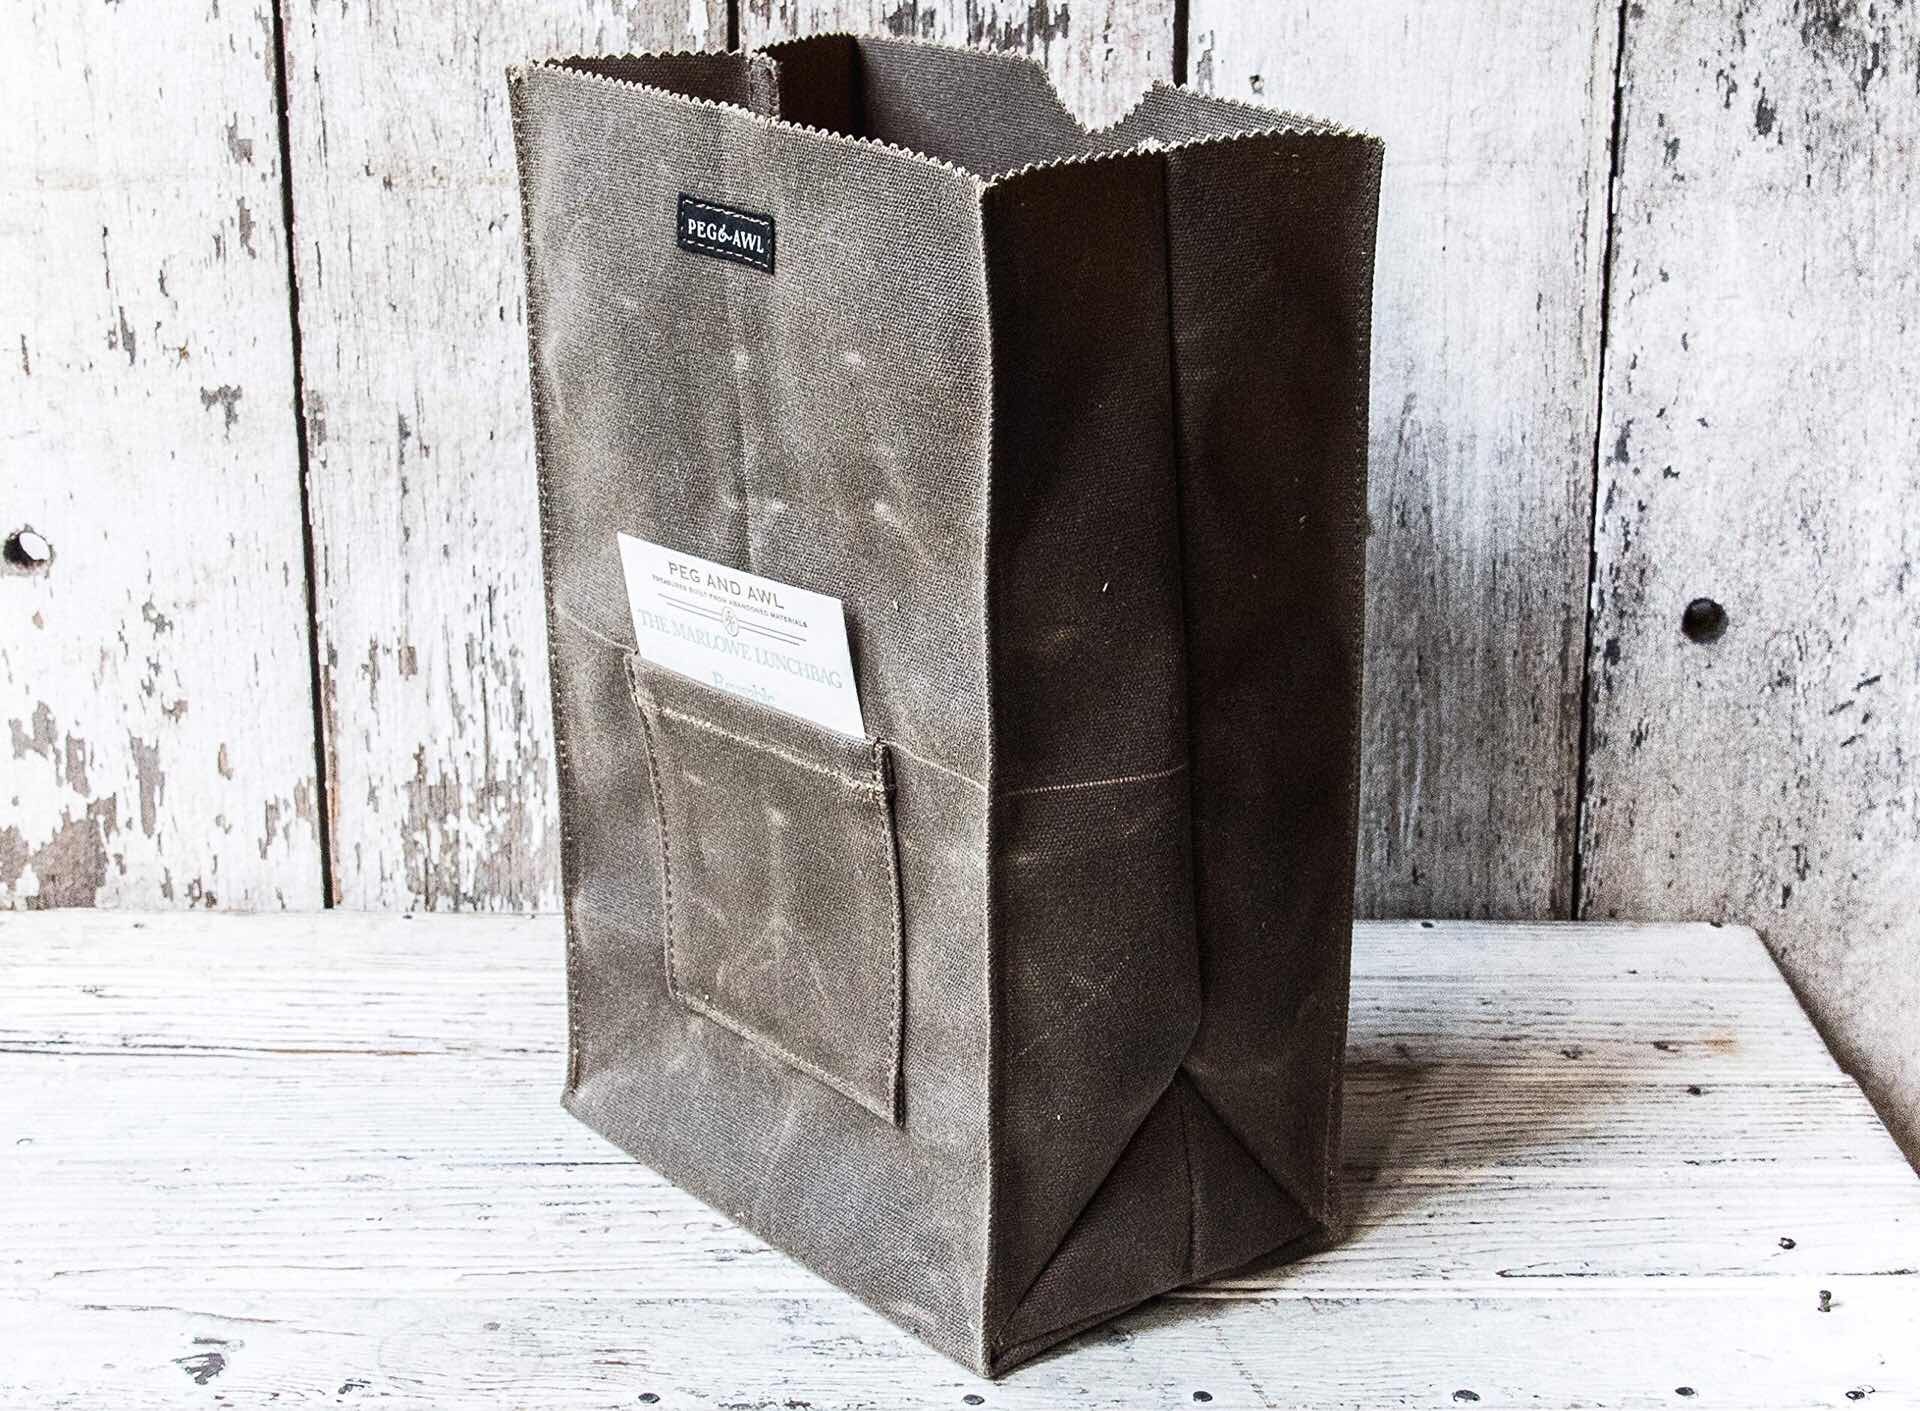 peg-and-awl-marlowe-waxed-canvas-lunch-bag-note-pocket